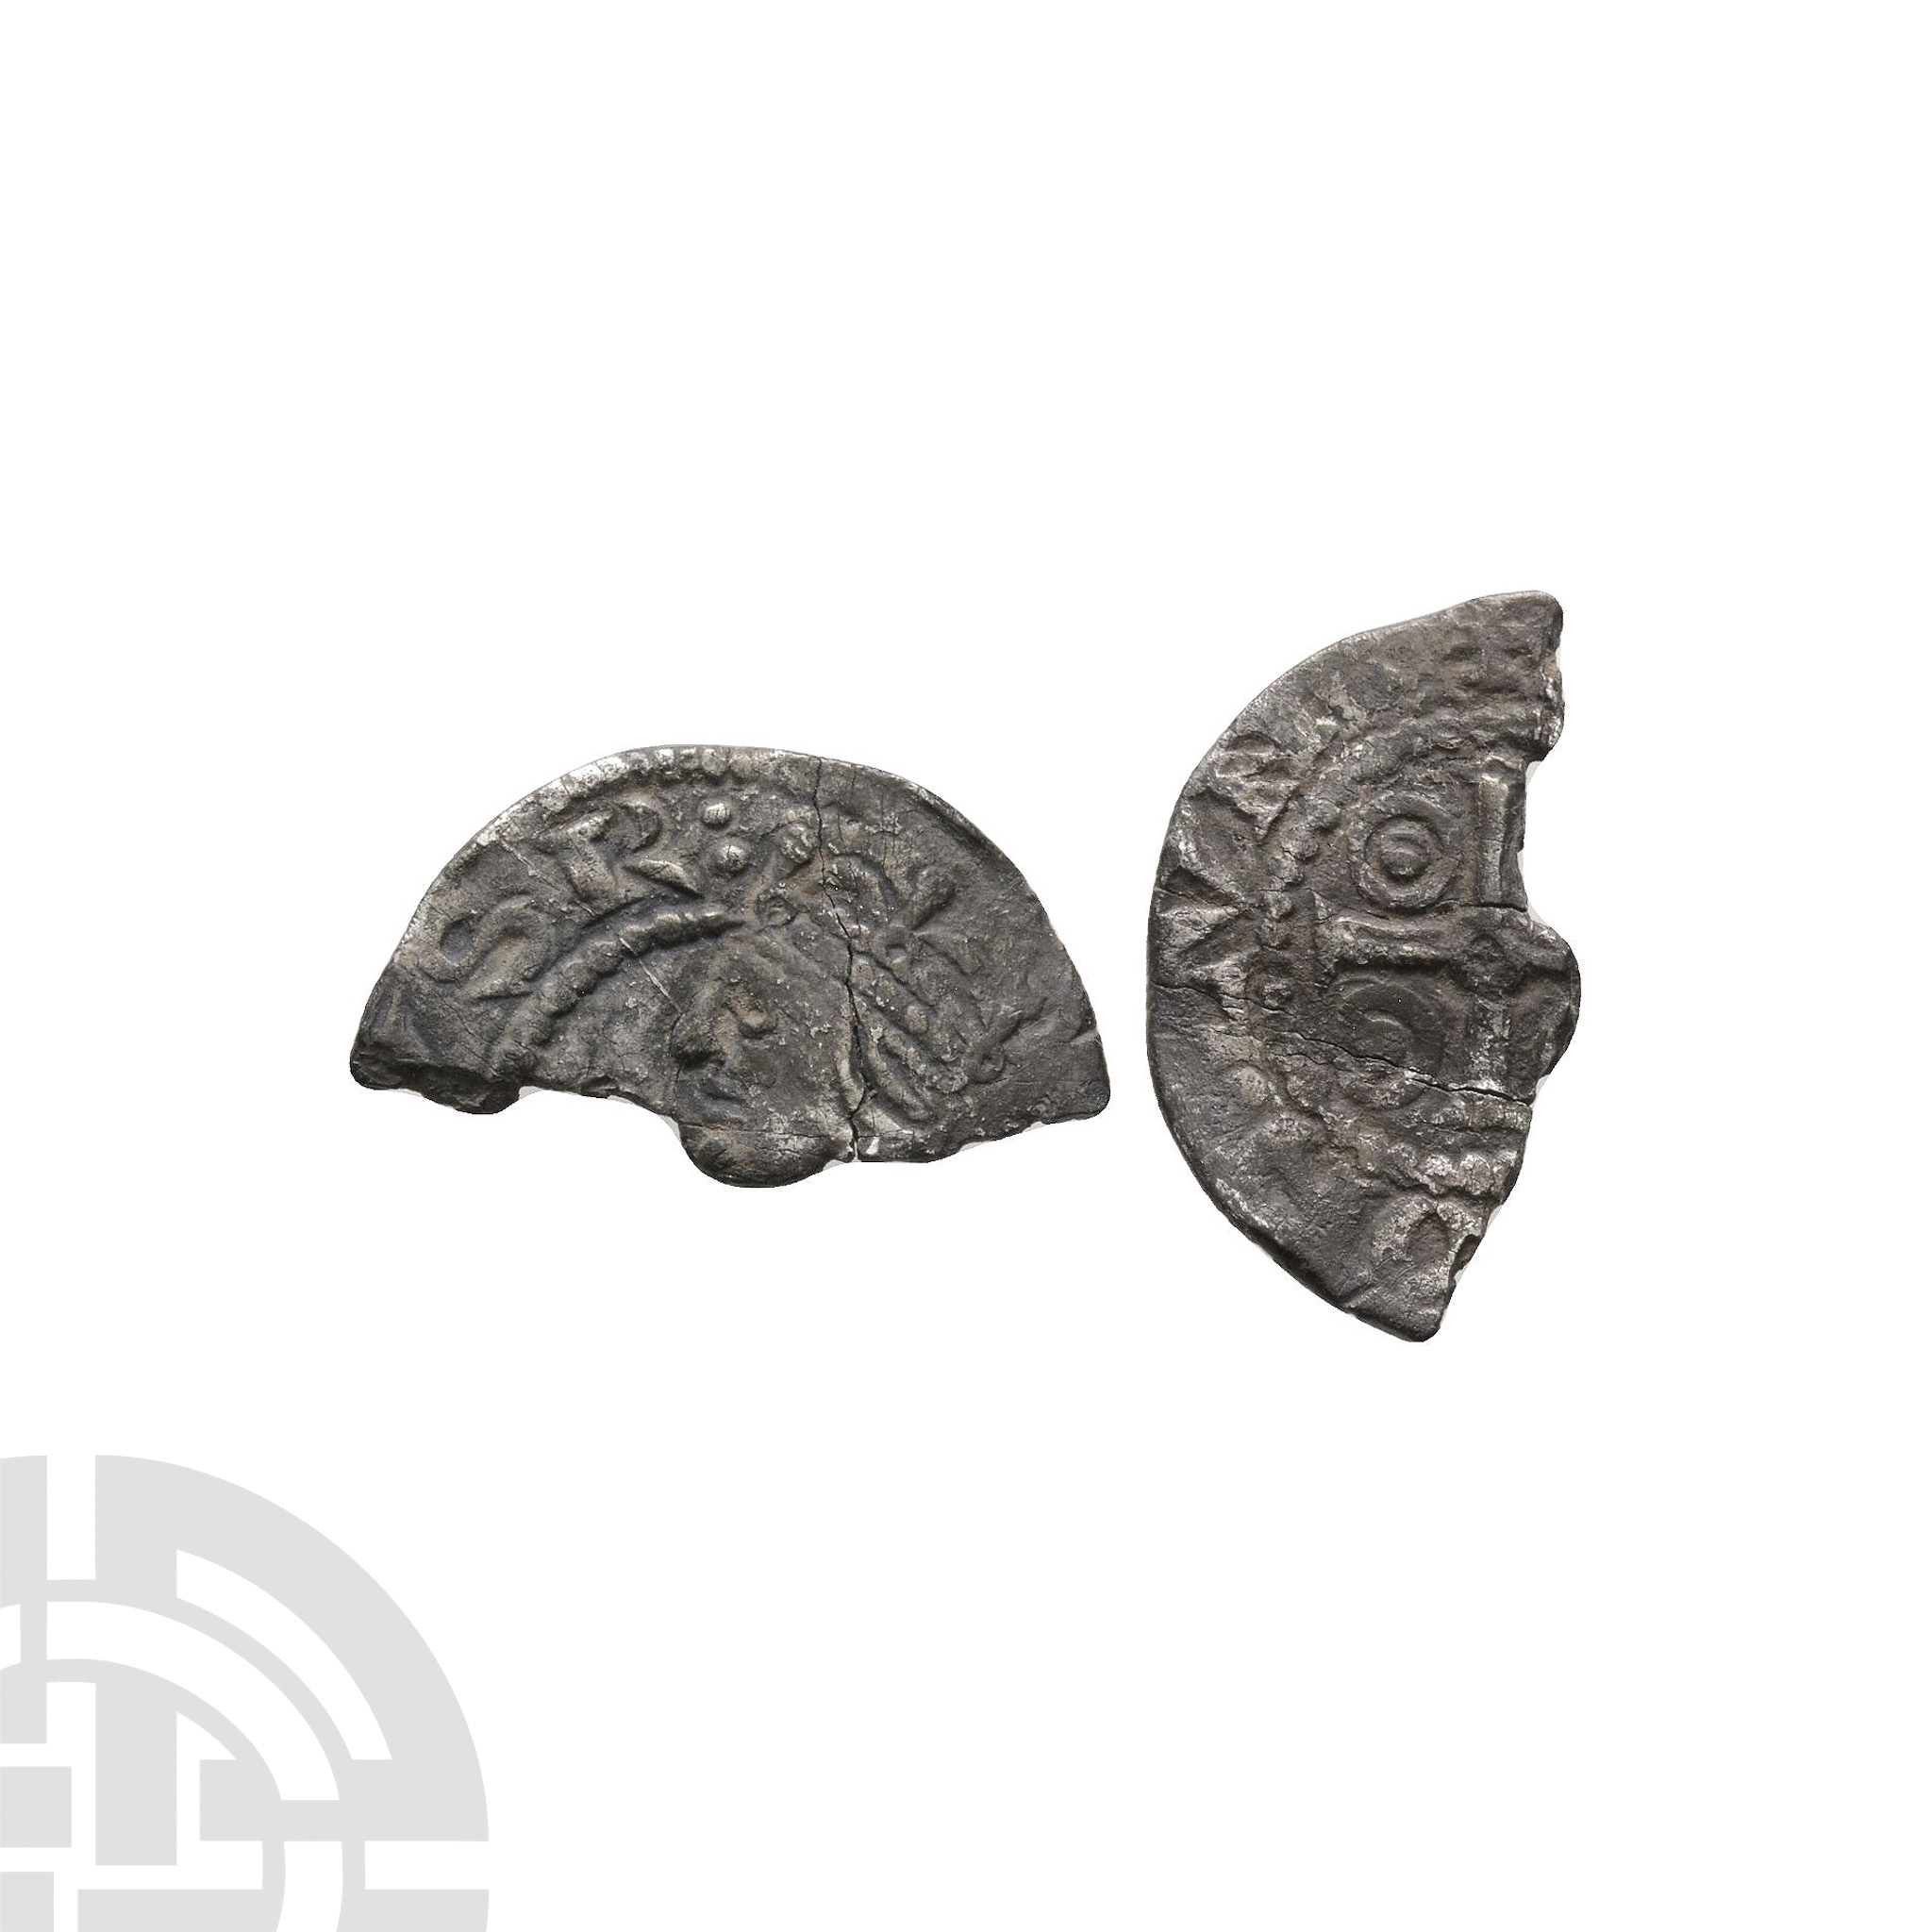 English Medieval Coins - Henry I - London - Small Profile Type AR Penny Fragment